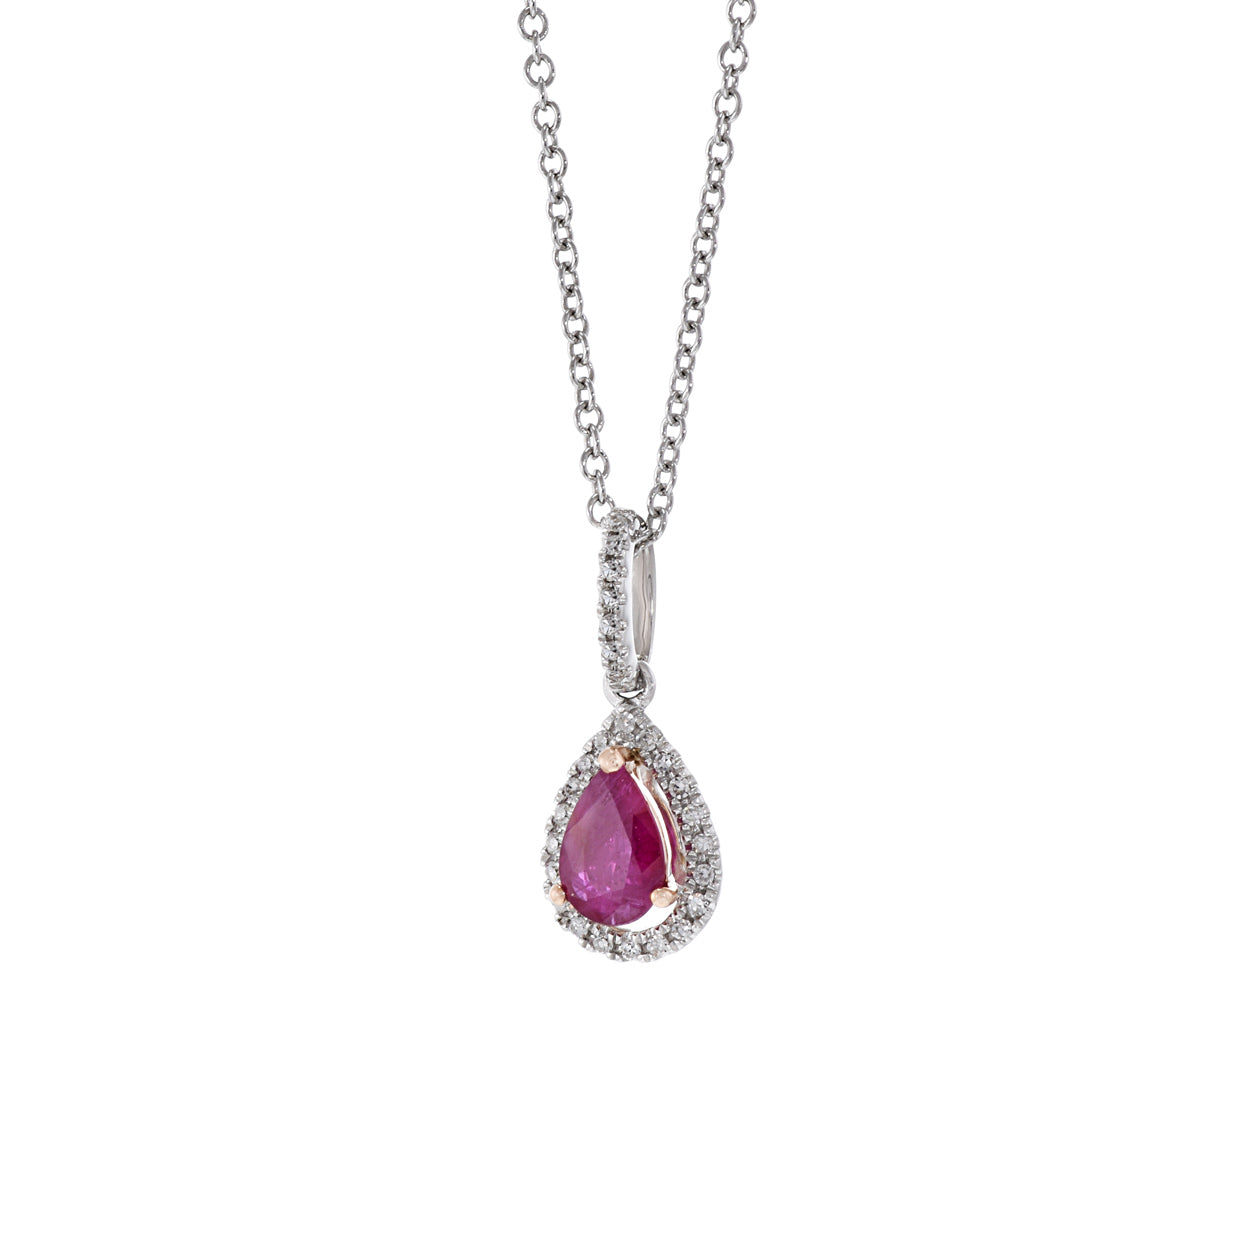 14KT White Gold Pear Shaped Ruby And Diamond Pendant